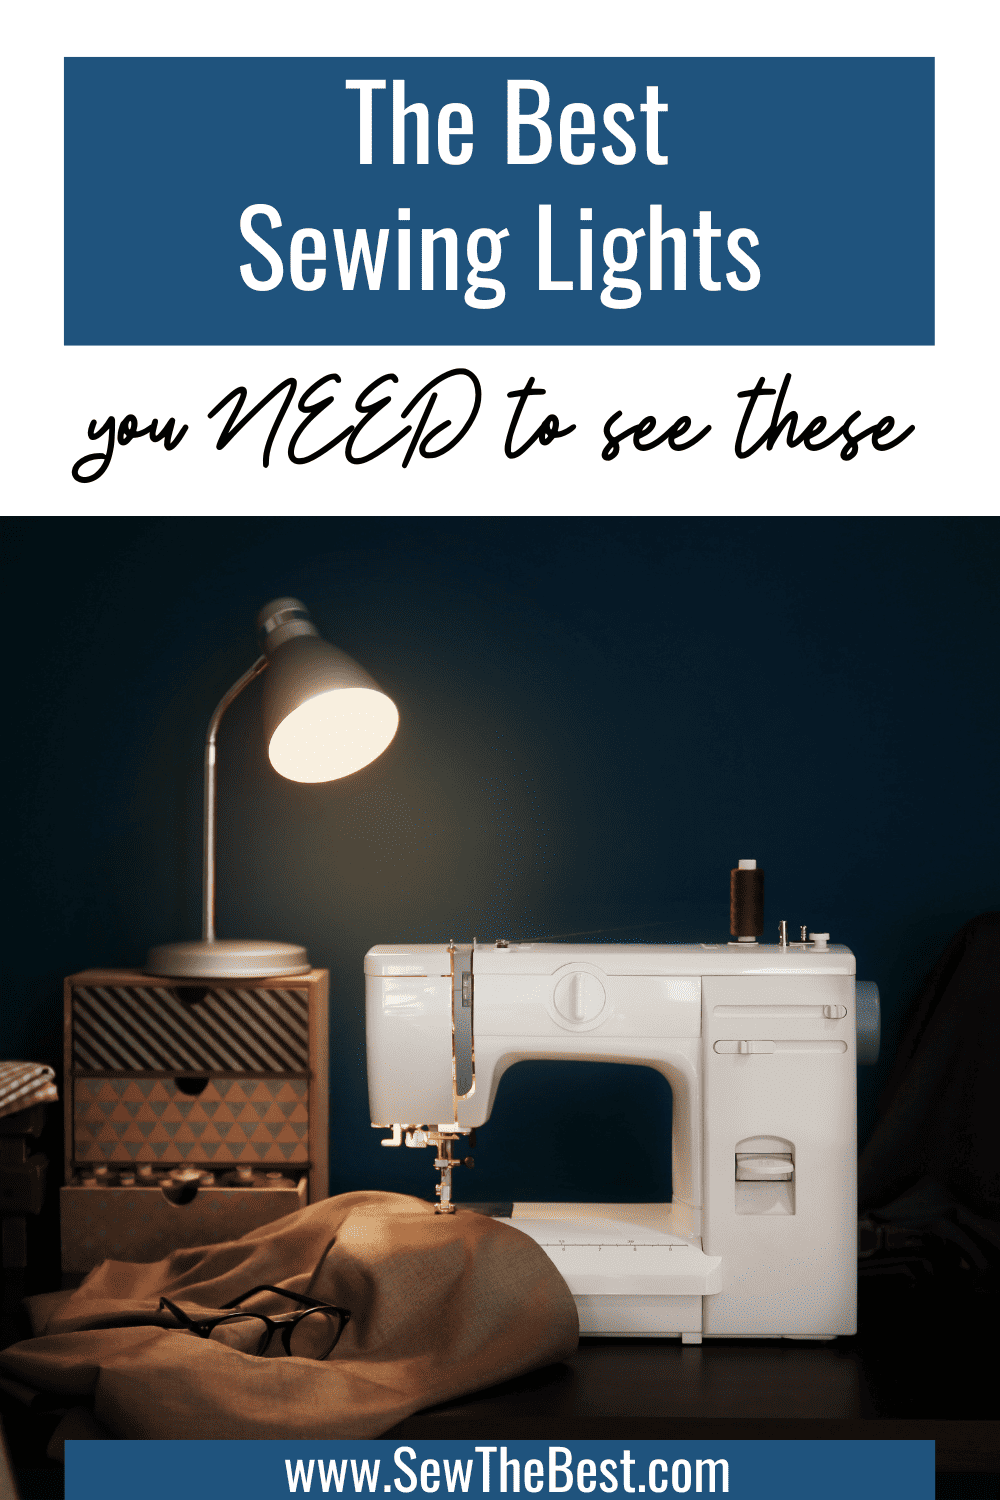 The Best Sewing Lights. you NEED to see these. Picture of a sewing area with a lamp and sewing machine follows.